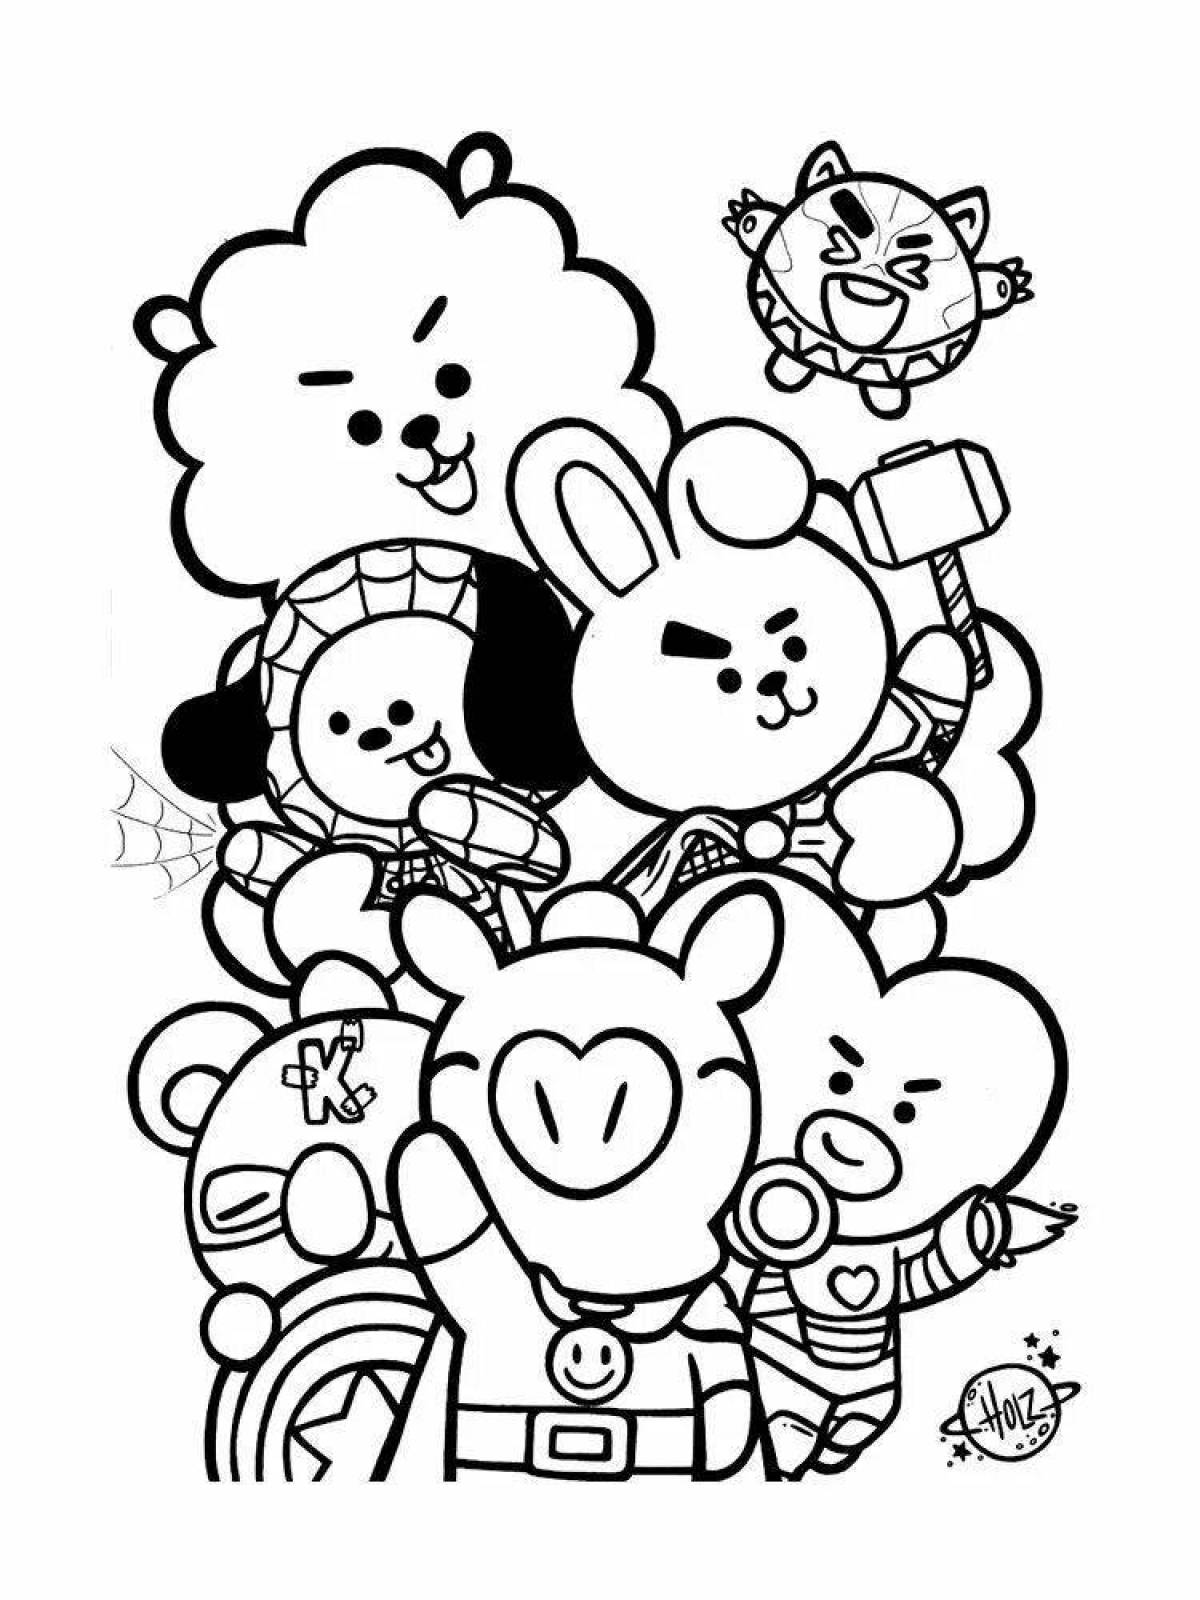 Amazing coloring page bt 21